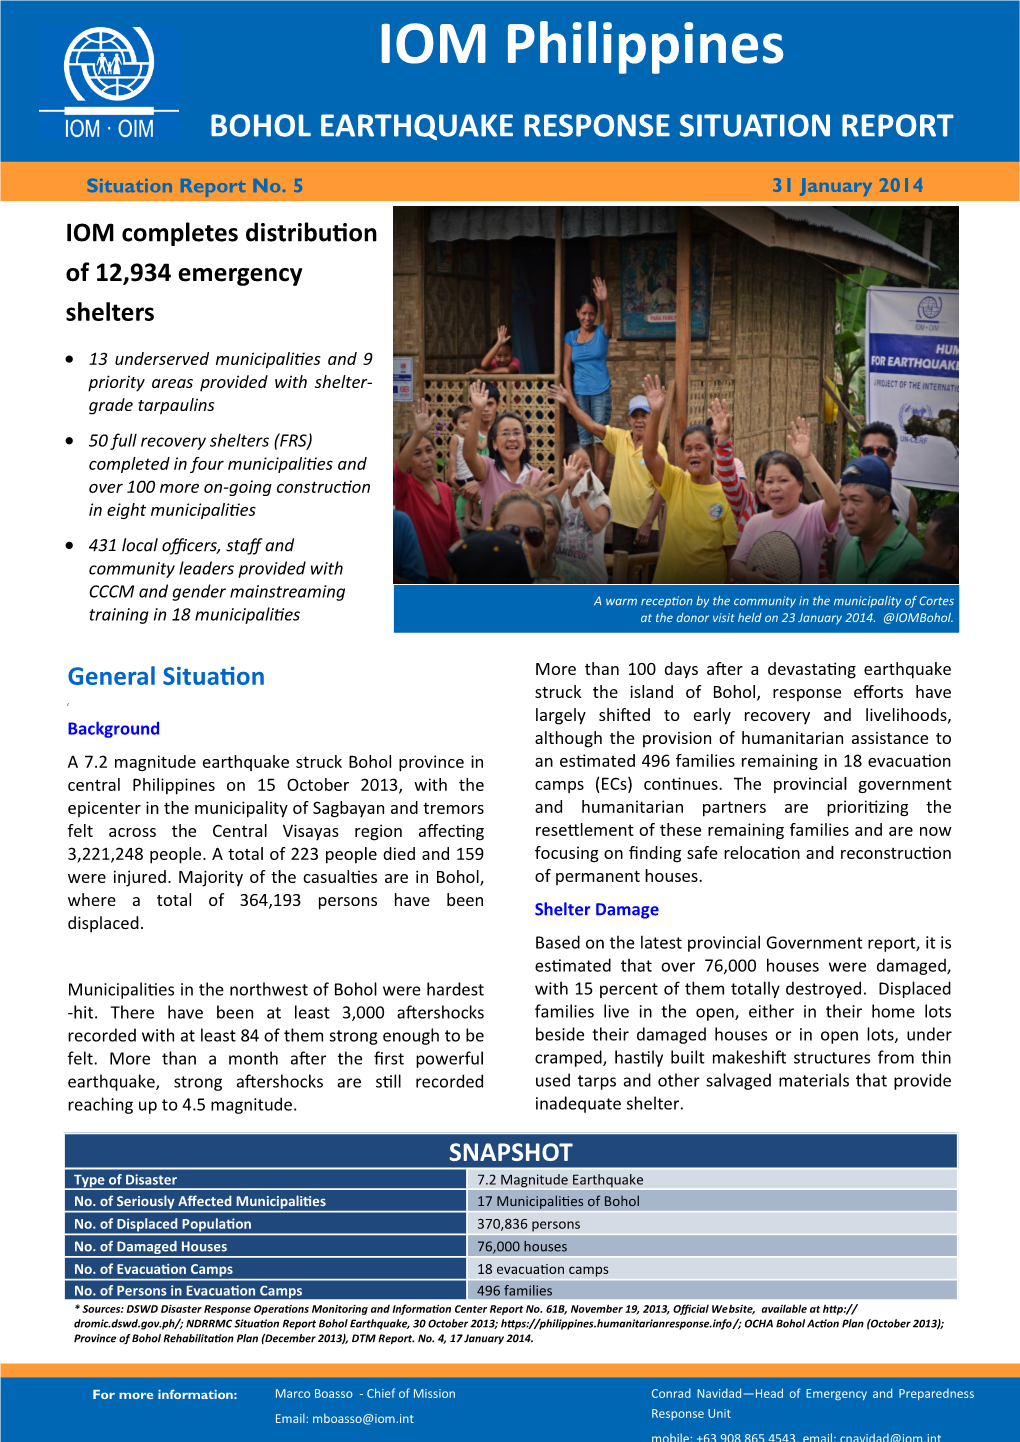 IOM Philippines Mission Bohol 31Jan2014 Situation Report